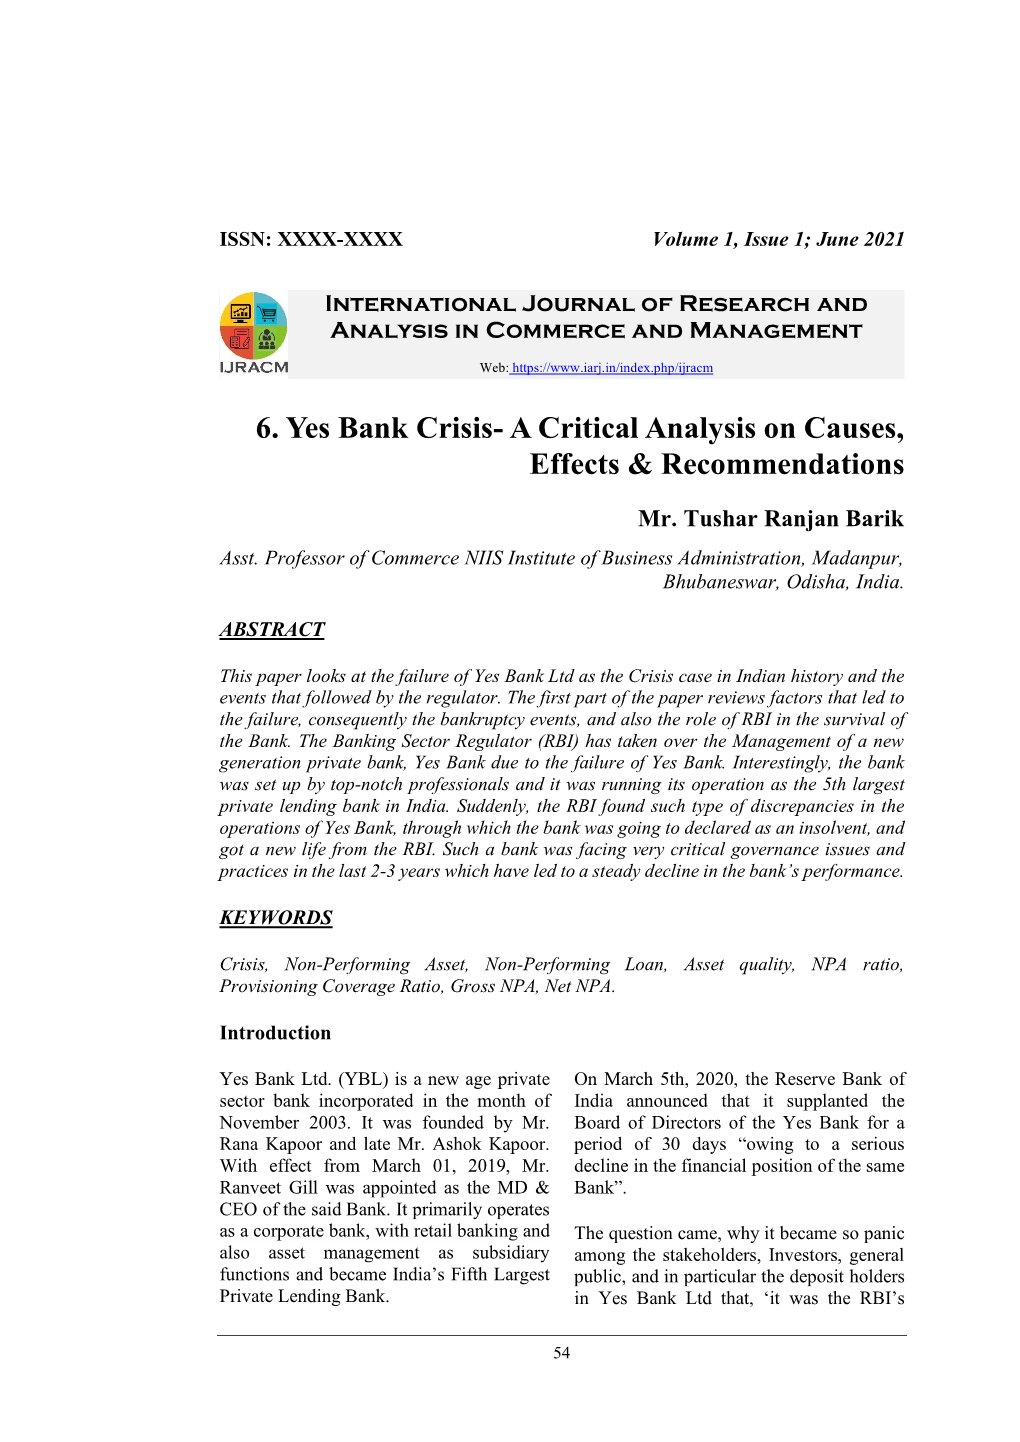 6. Yes Bank Crisis- a Critical Analysis on Causes, Effects & Recommendations